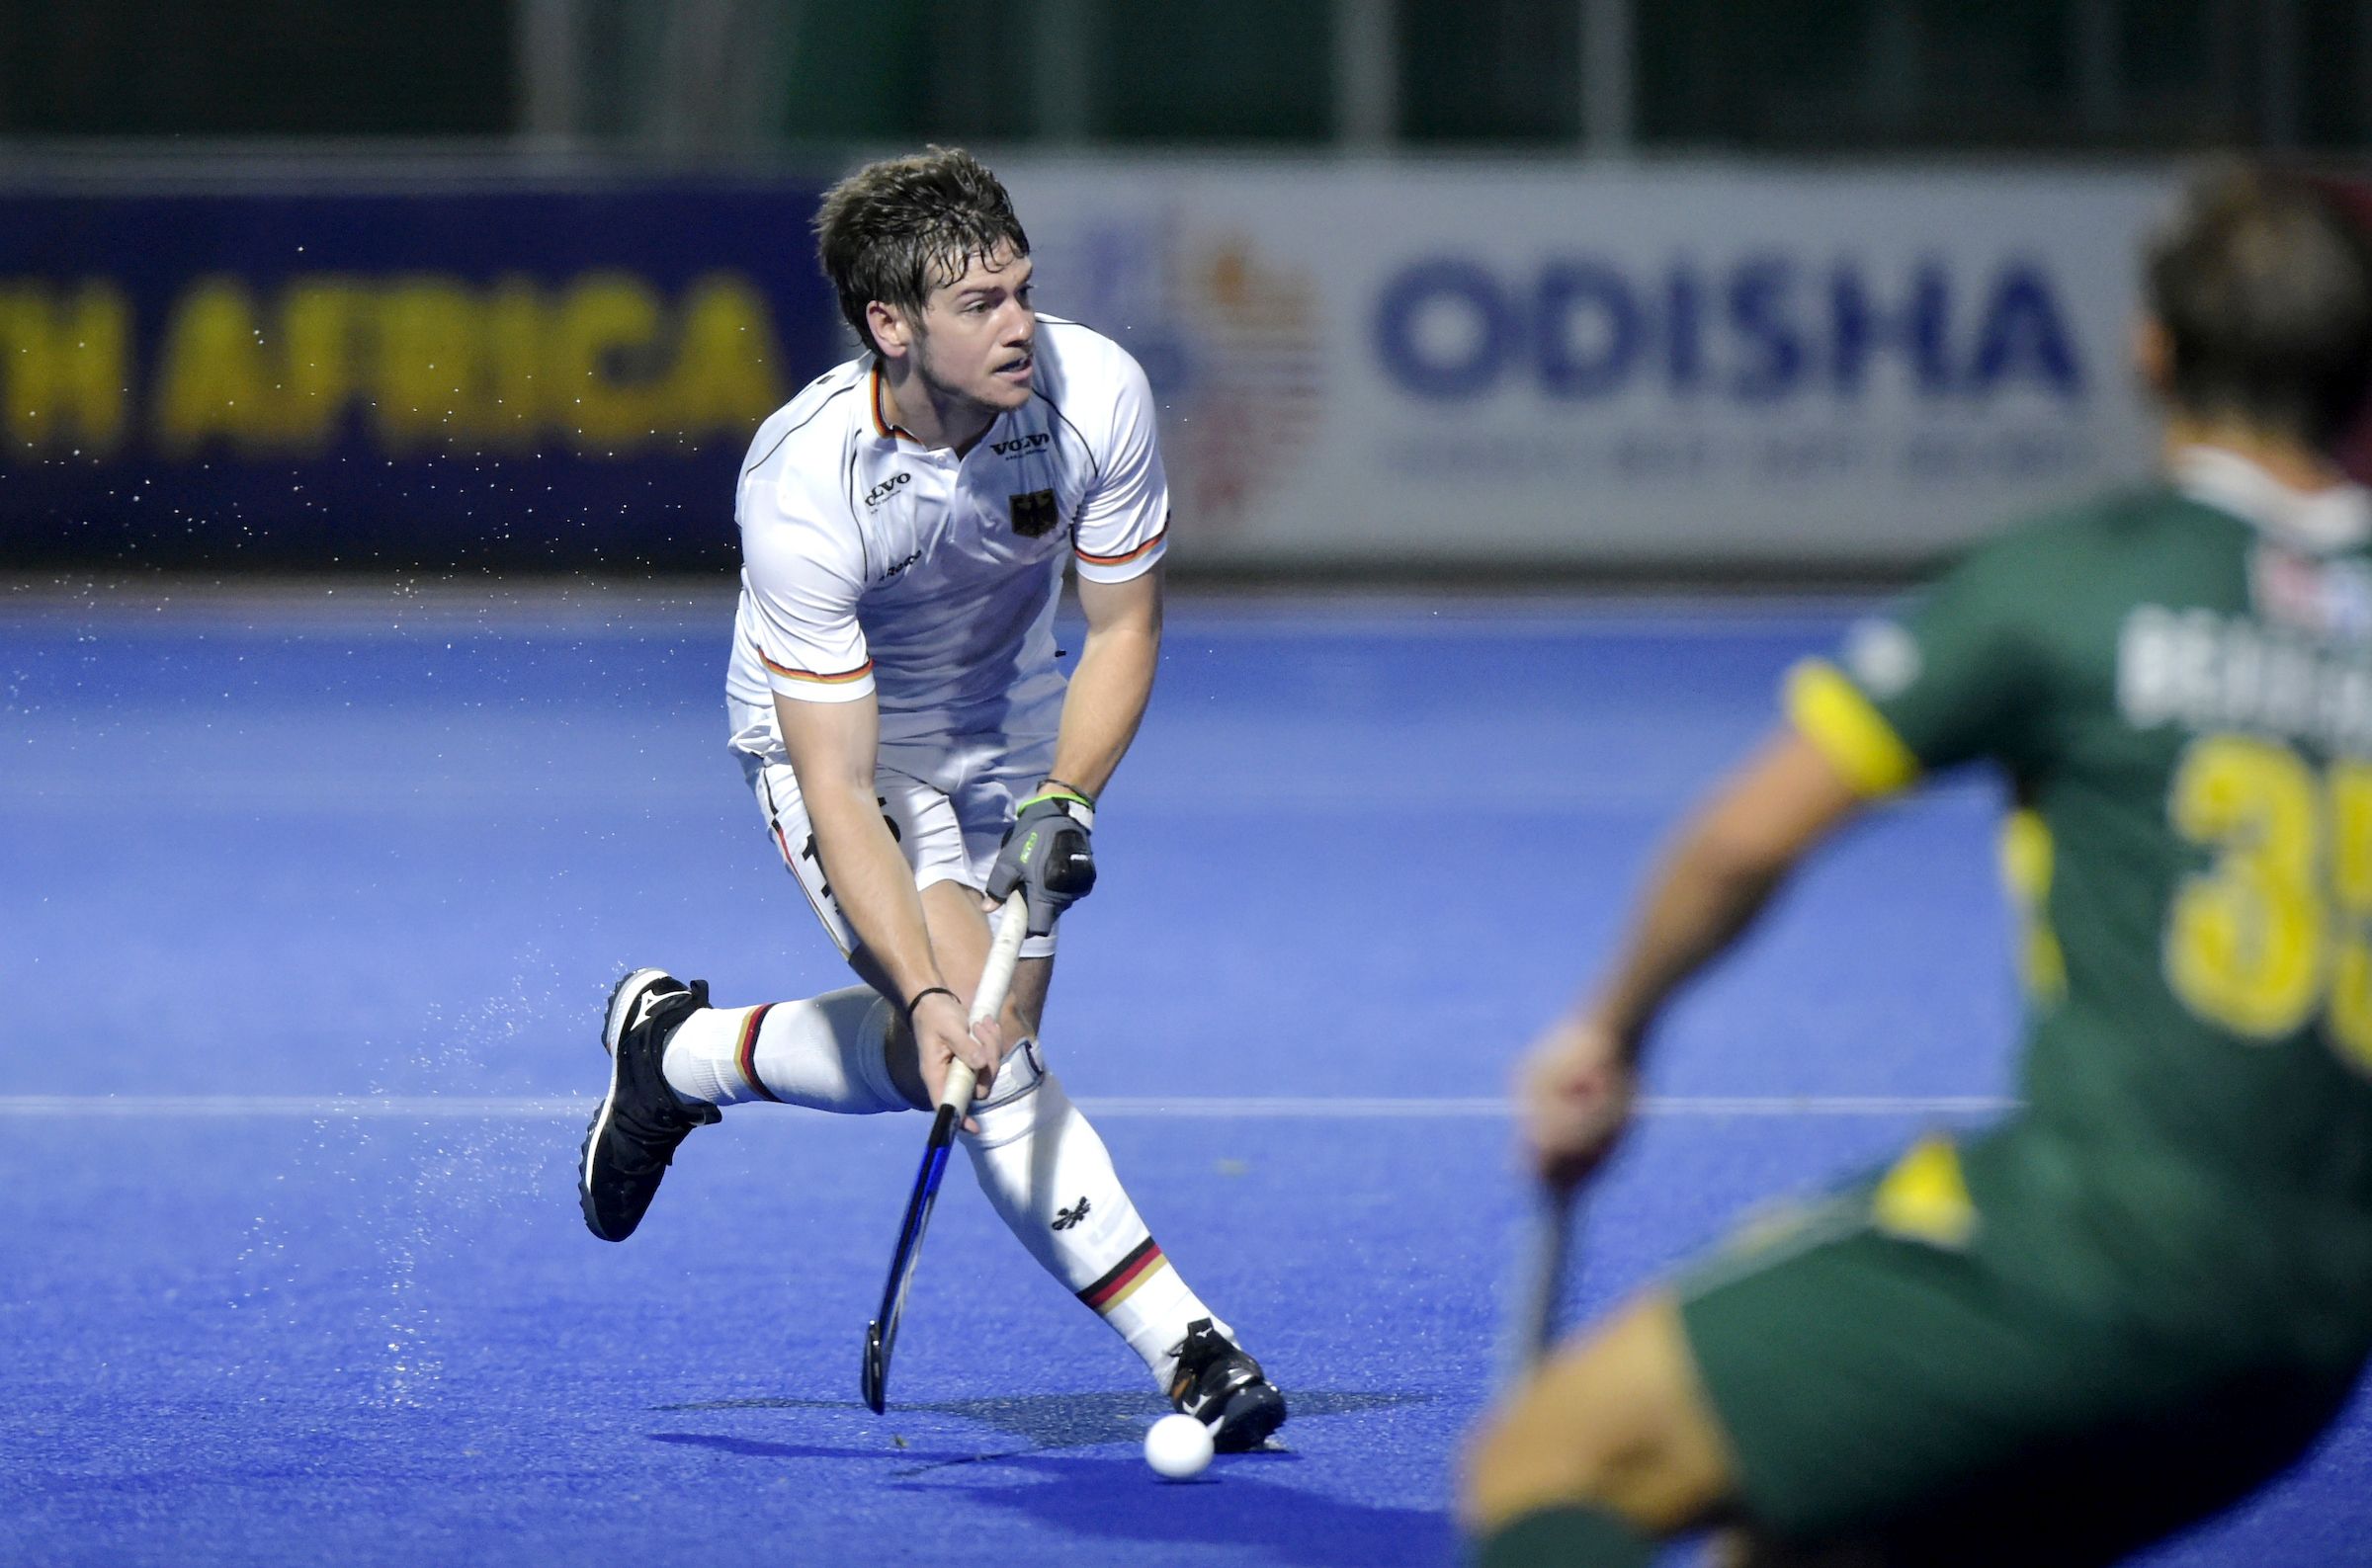 PL2 RSA GER E - 4 from 4 for Germany in Pro-League - The German men were the only team to win all four games at the Pro-League event in South Africa, which was played in tournament form for the first time. After the 3:2 and 4:2 over France and the 6:1 in the first